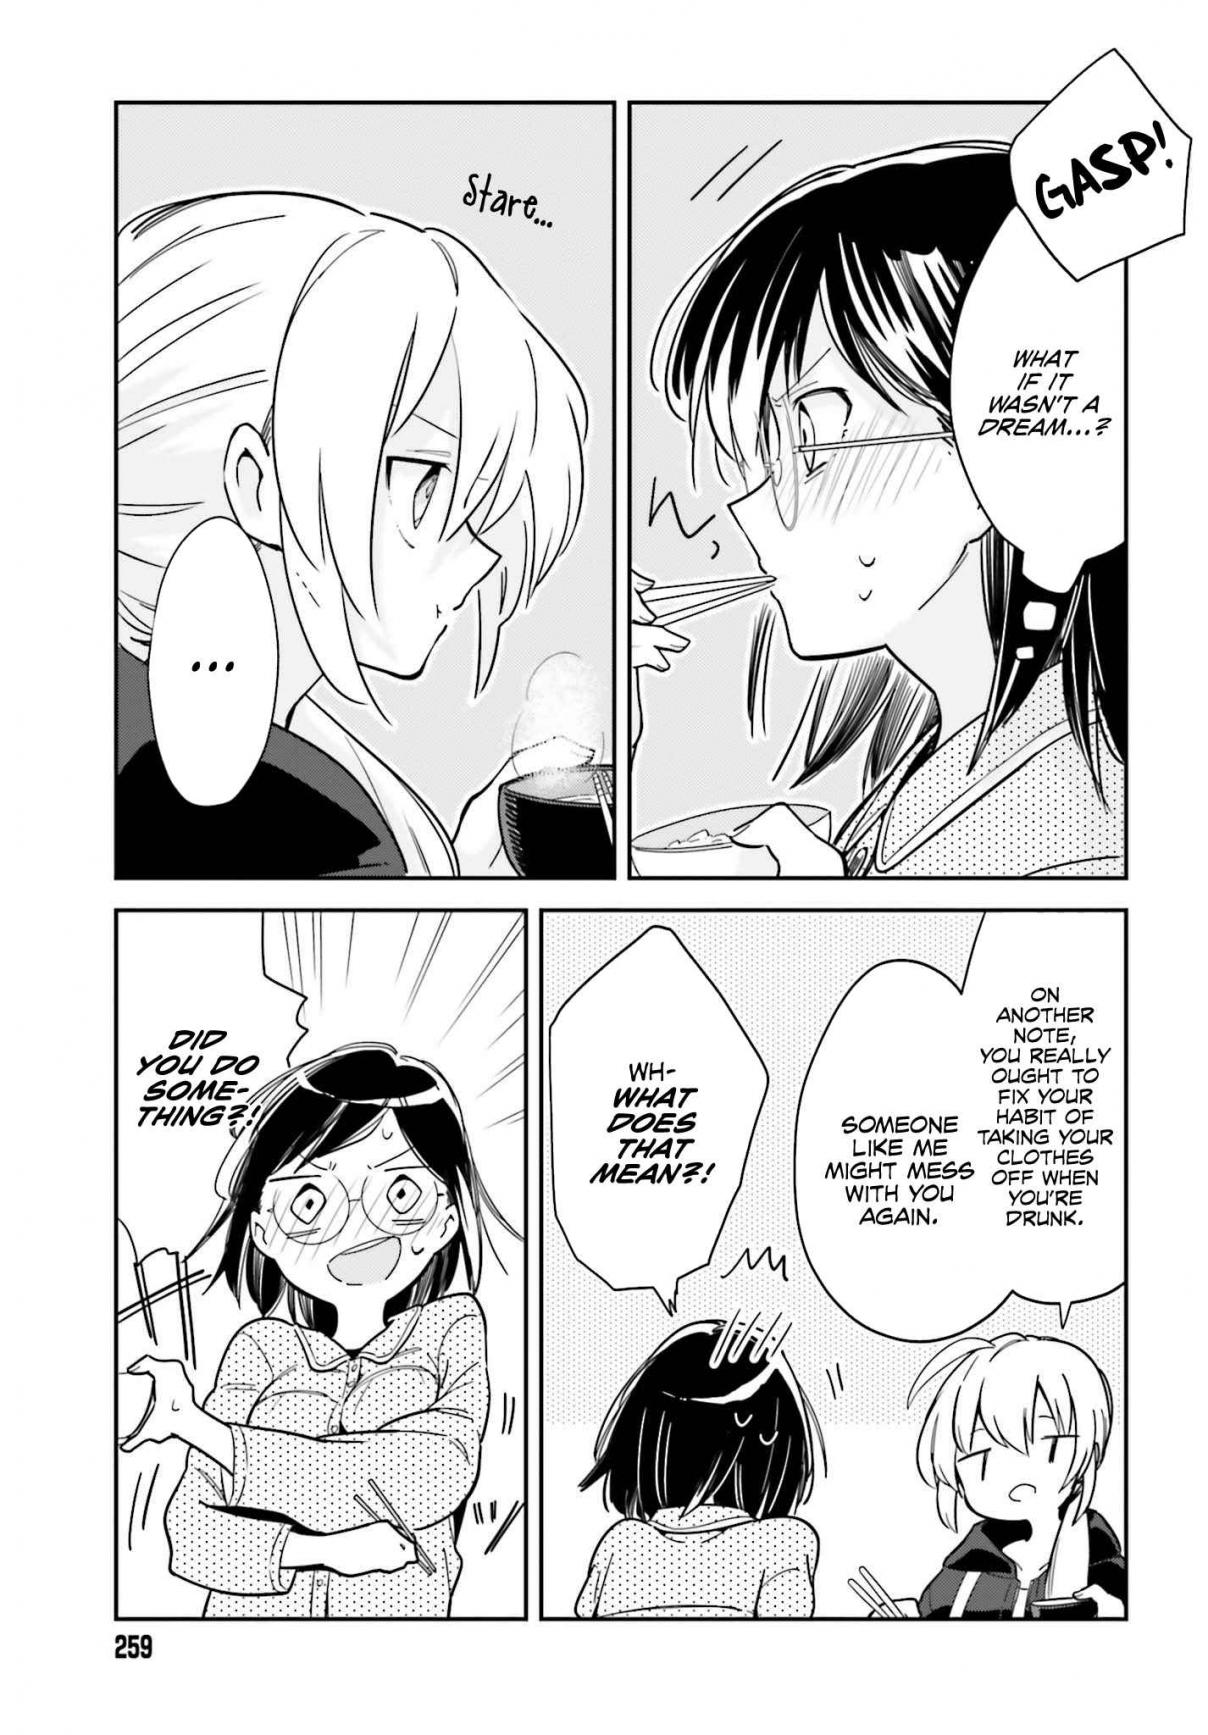 Even if it was just once, I regret it Vol. 1 Ch. 1 Are you regretting it?